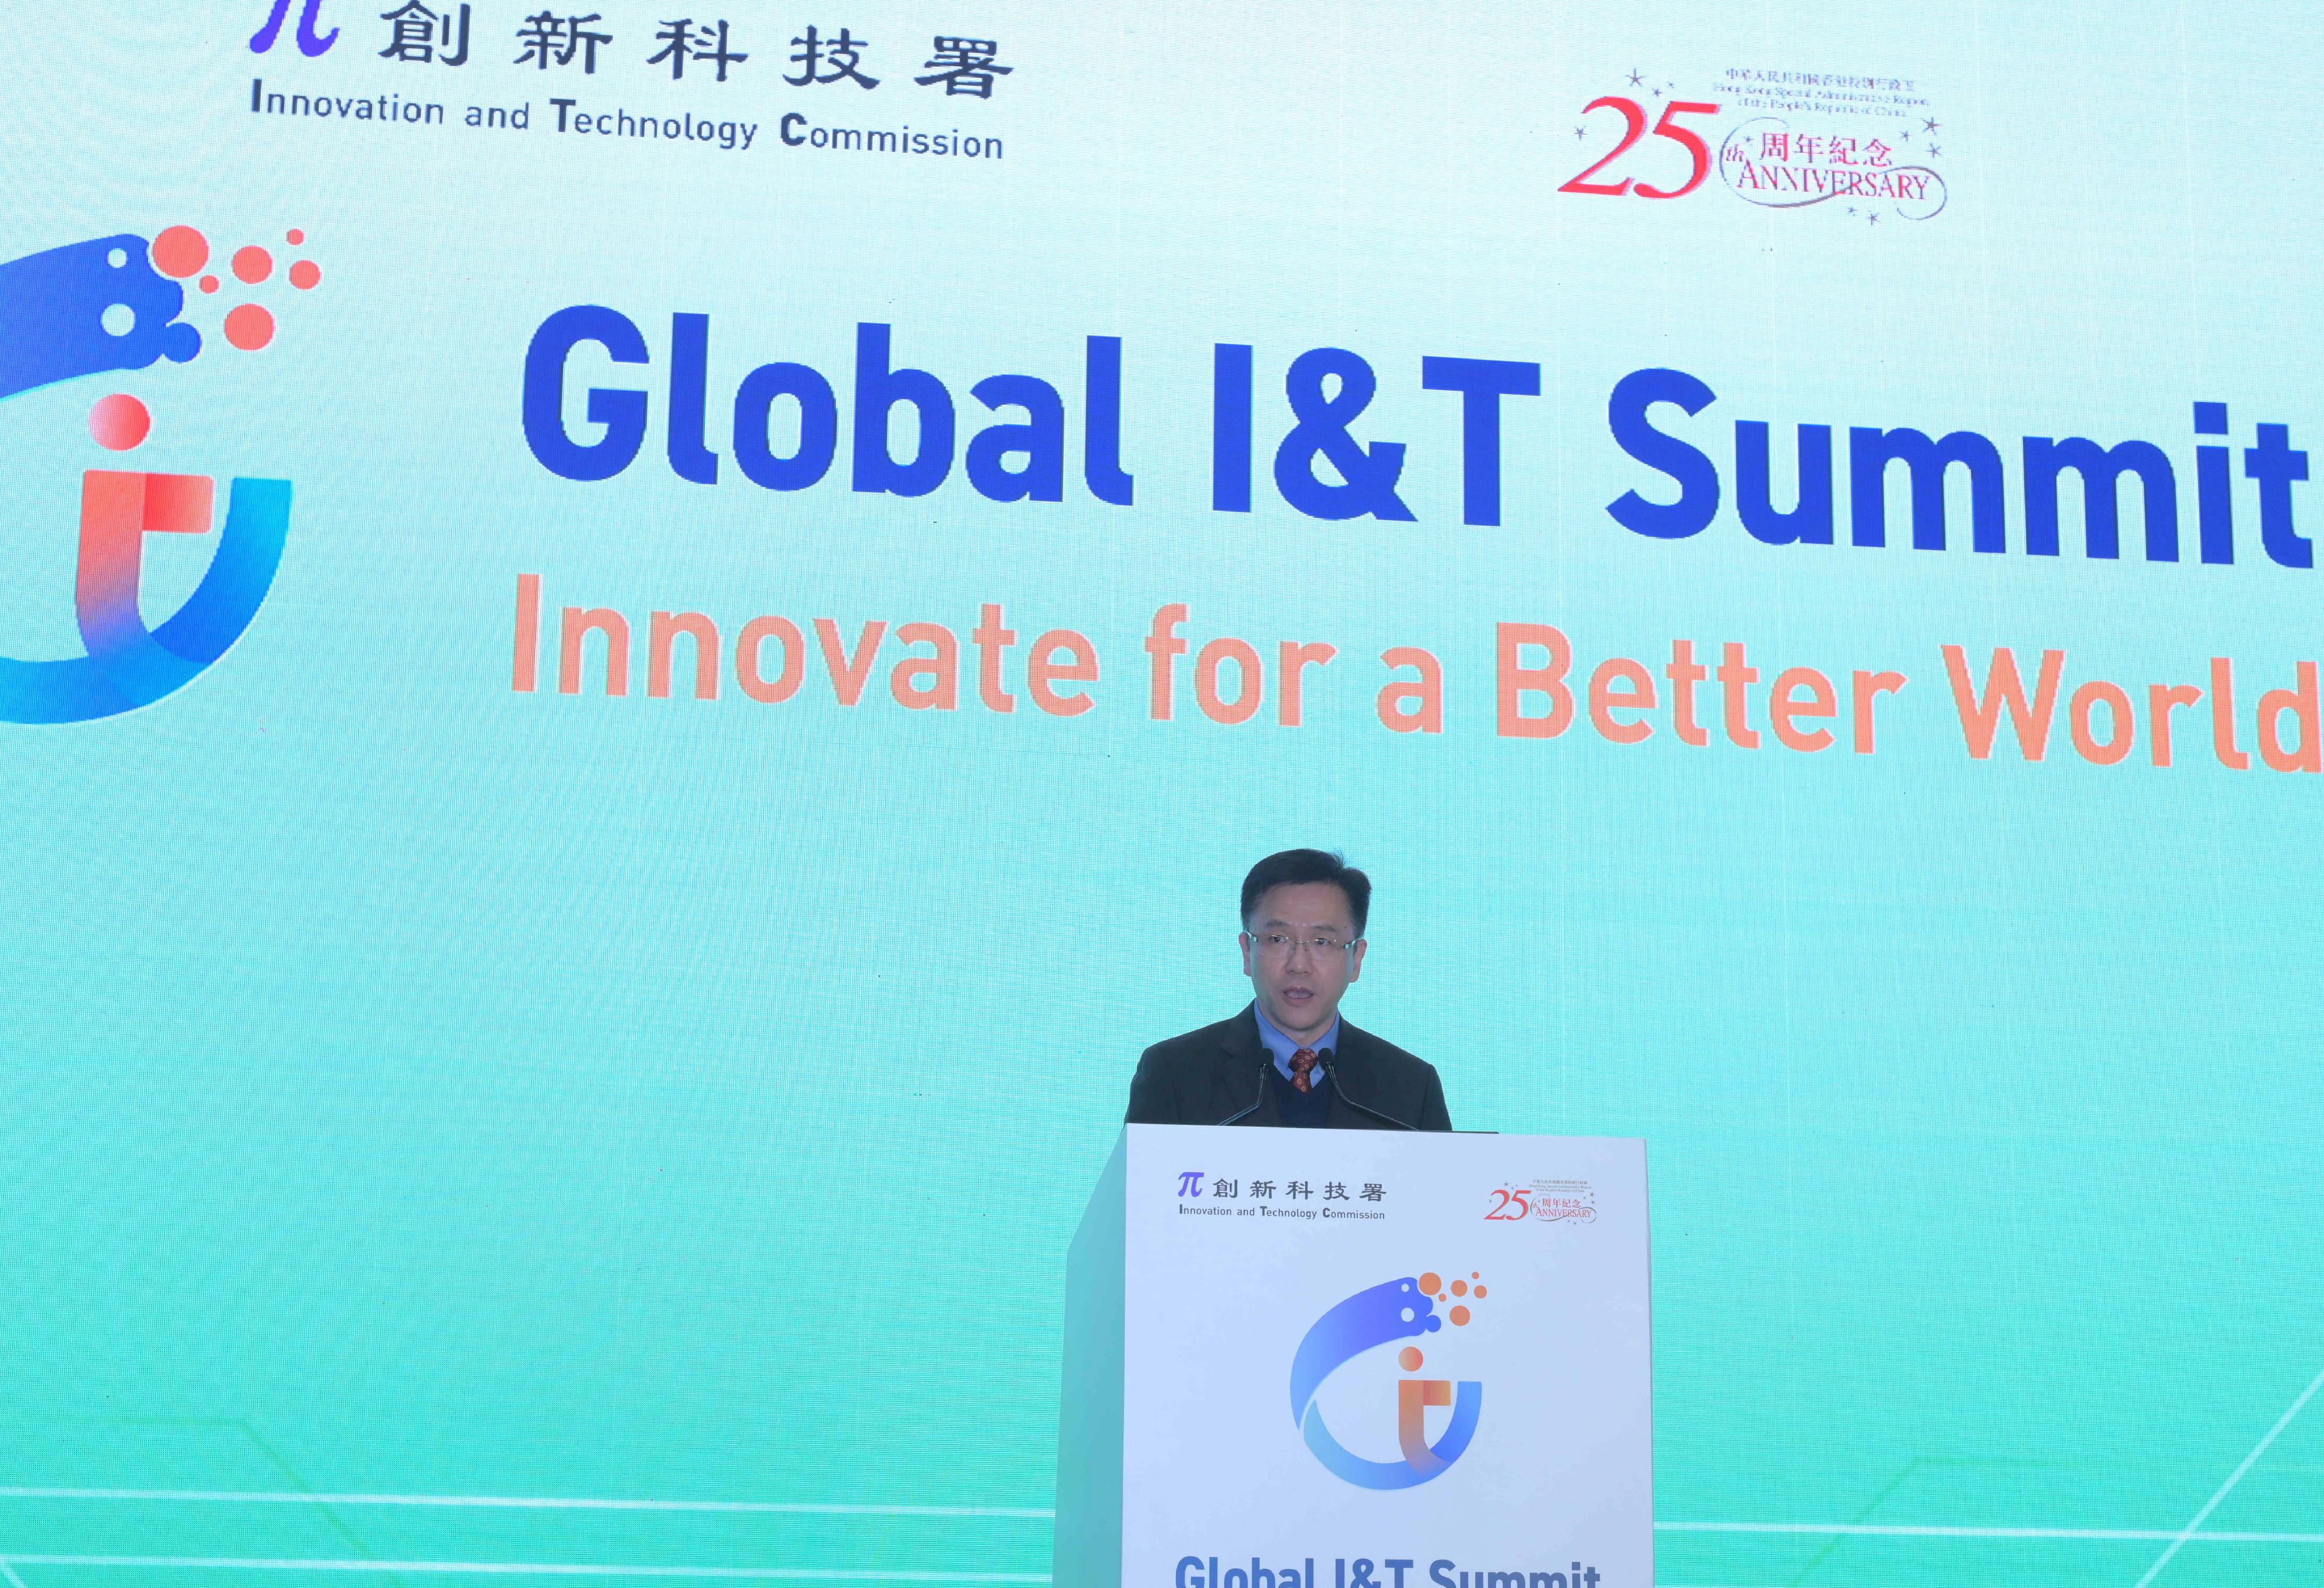 Remarks by the Secretary for Innovation, Technology and Industry, Professor Sun Dong at the concluding session of the Global I&T Summit today (December 15).